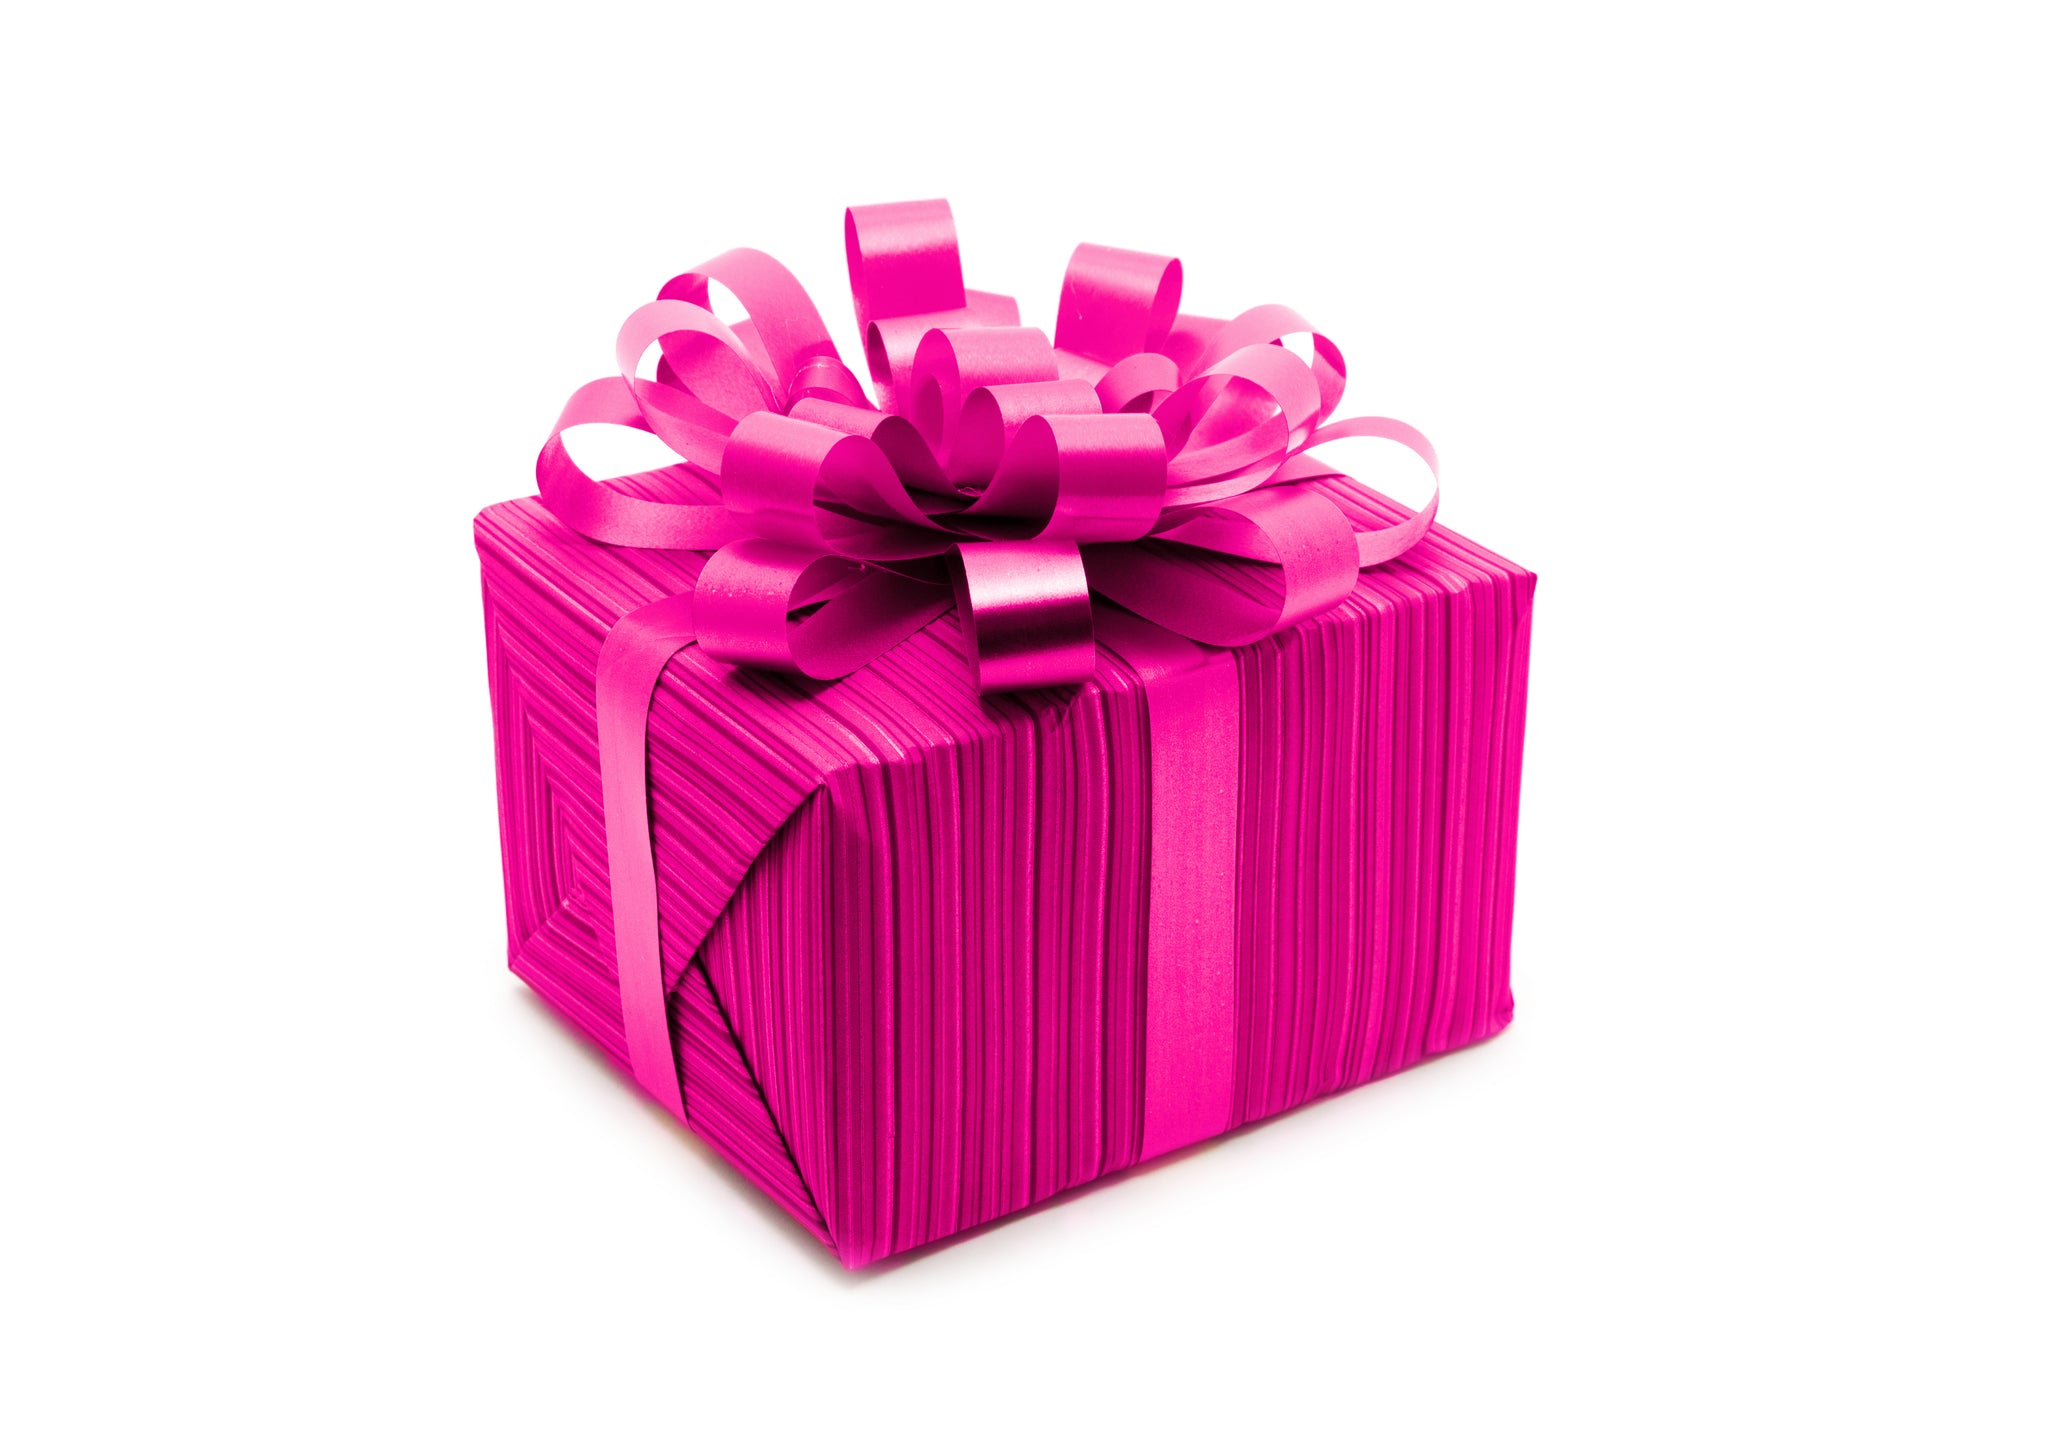 COMPLIMENTARY GIFT WRAP FOR IN-STORE PICKUP ONLY